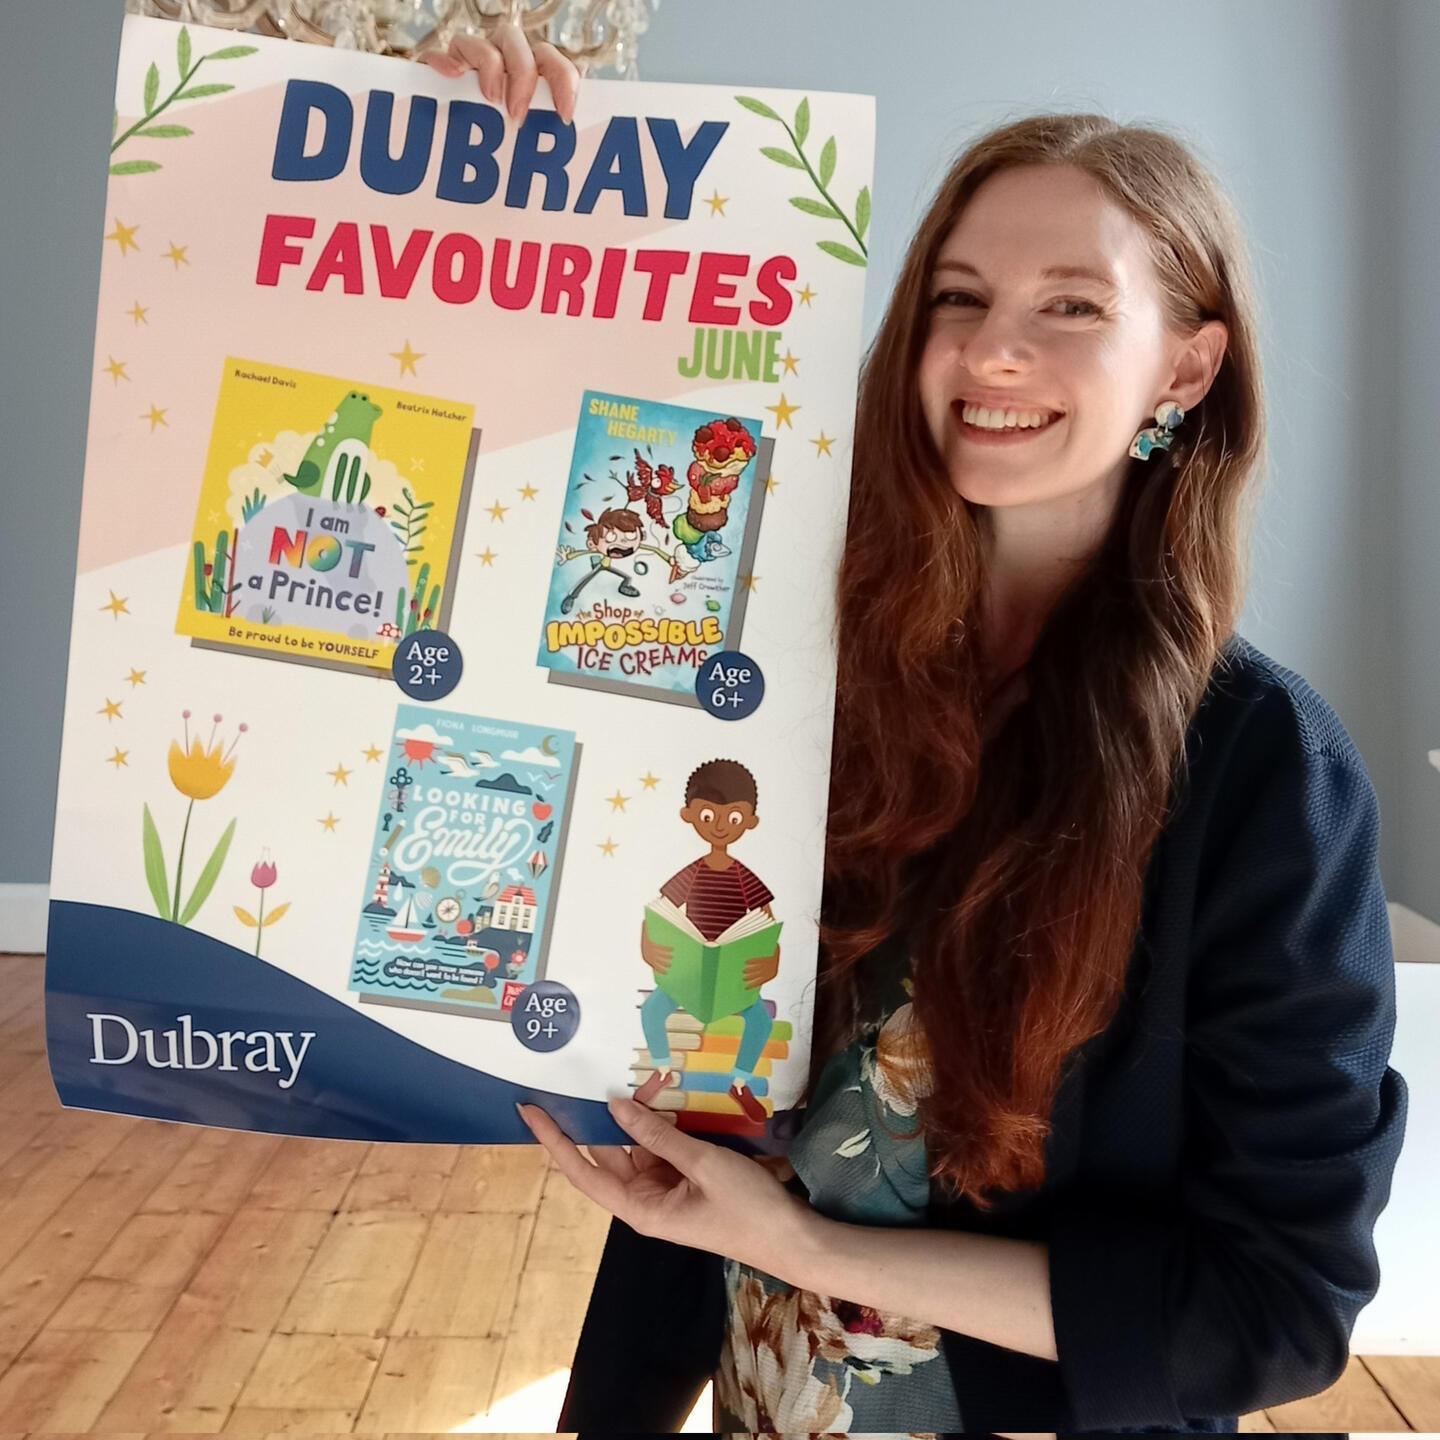 Fiona is holding a Dubray poster showing their June favourites: I Am Not A Prince, the Shop of Impossible Ice Creams and Looking for Emily